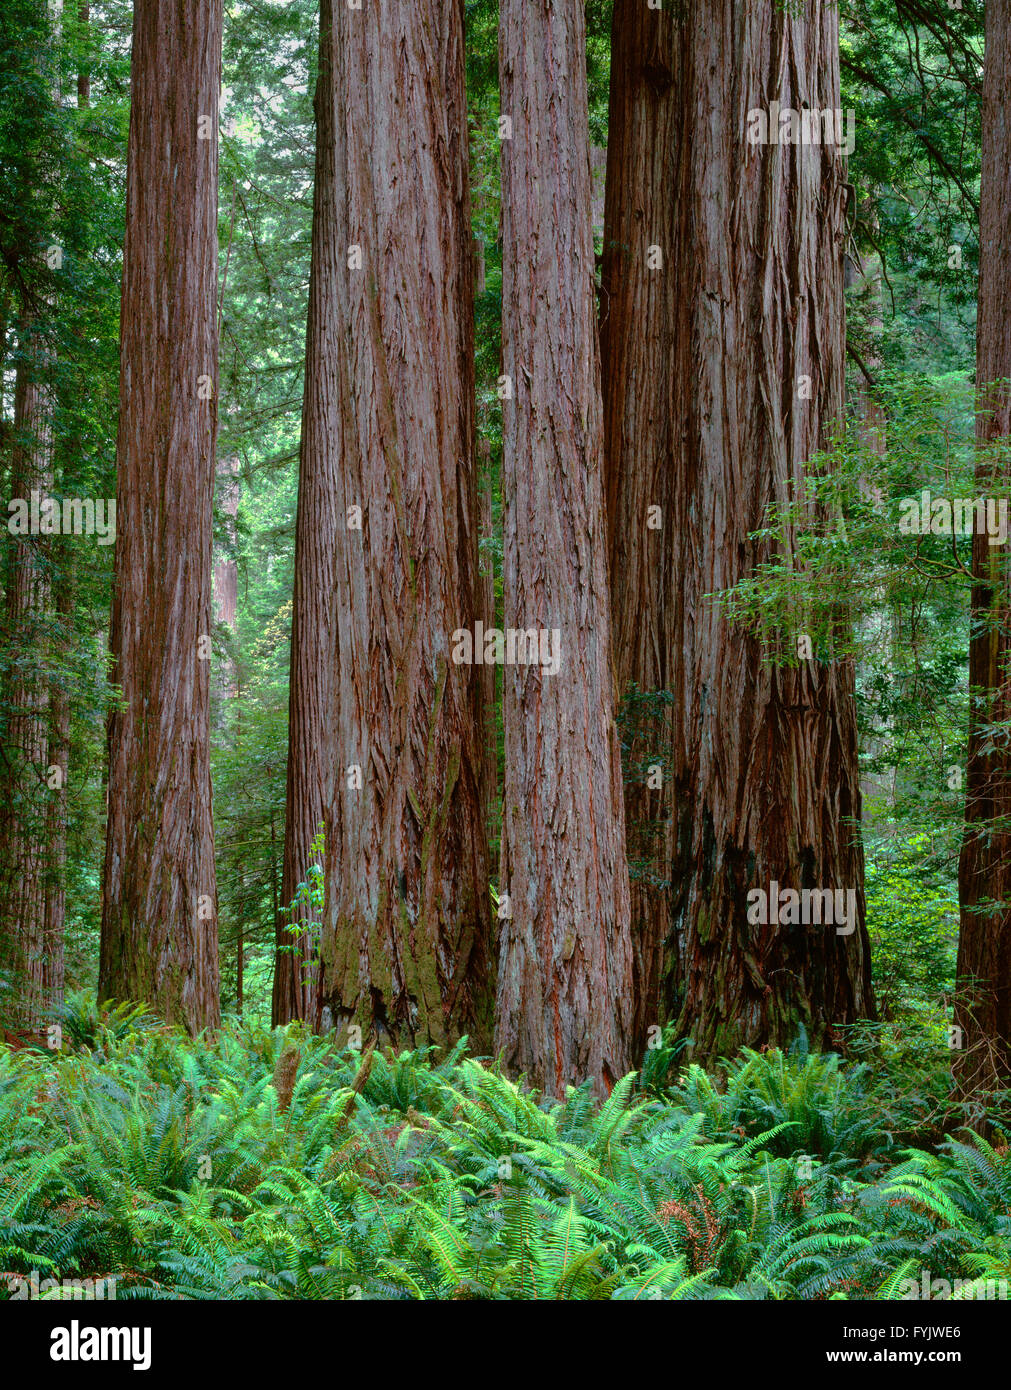 USA, California, Jedediah Smith State Park, Ancient redwoods tower above ferns in understory at the Stout Grove. Stock Photo